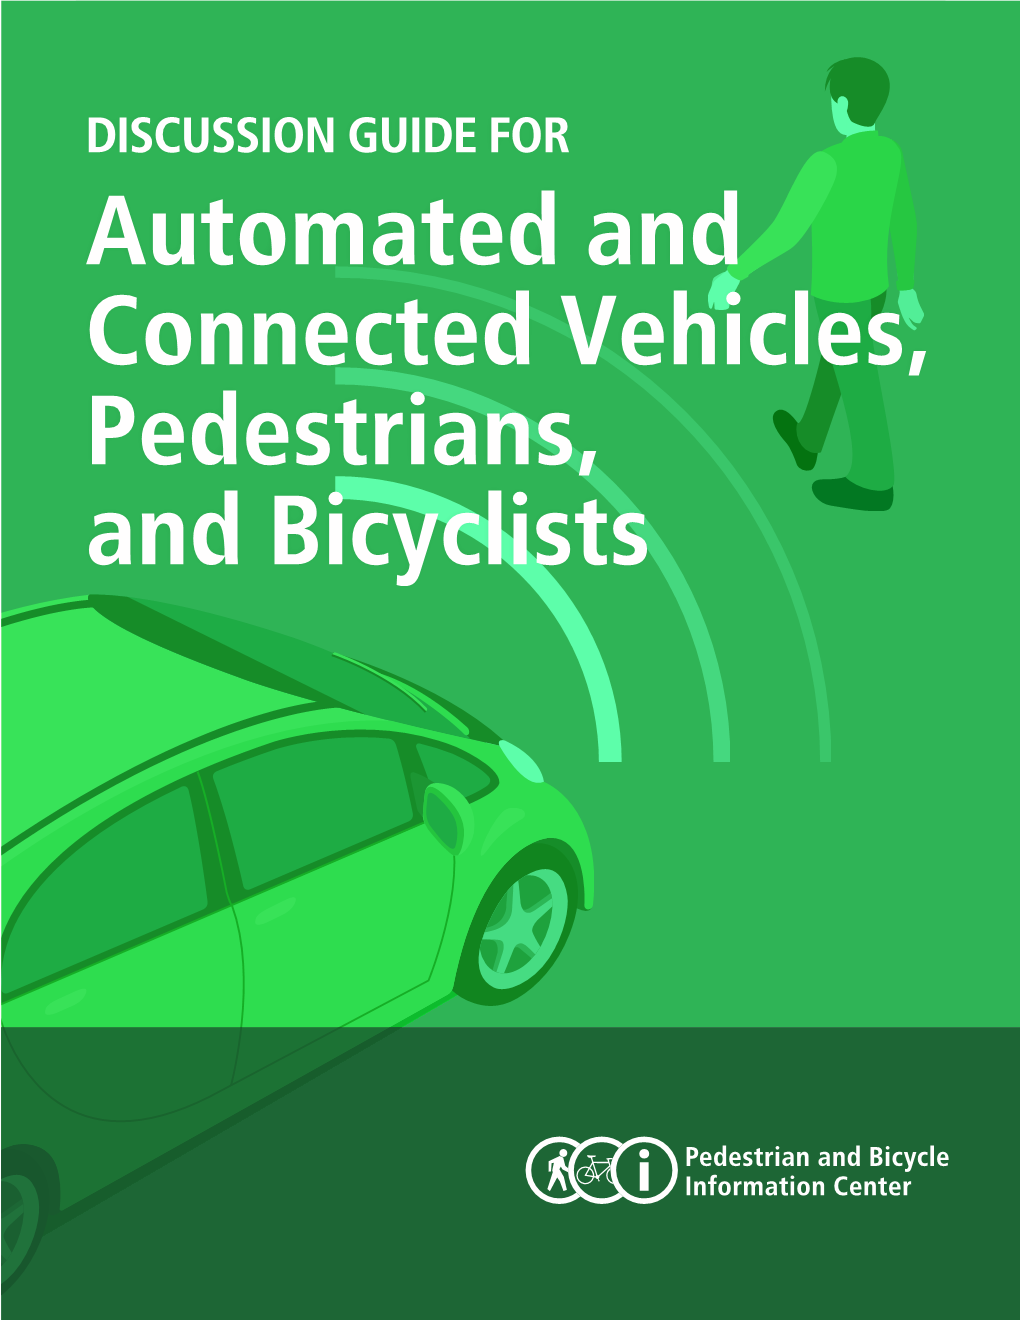 DISCUSSION GUIDE for Automated and Connected Vehicles, Pedestrians, and Bicyclists